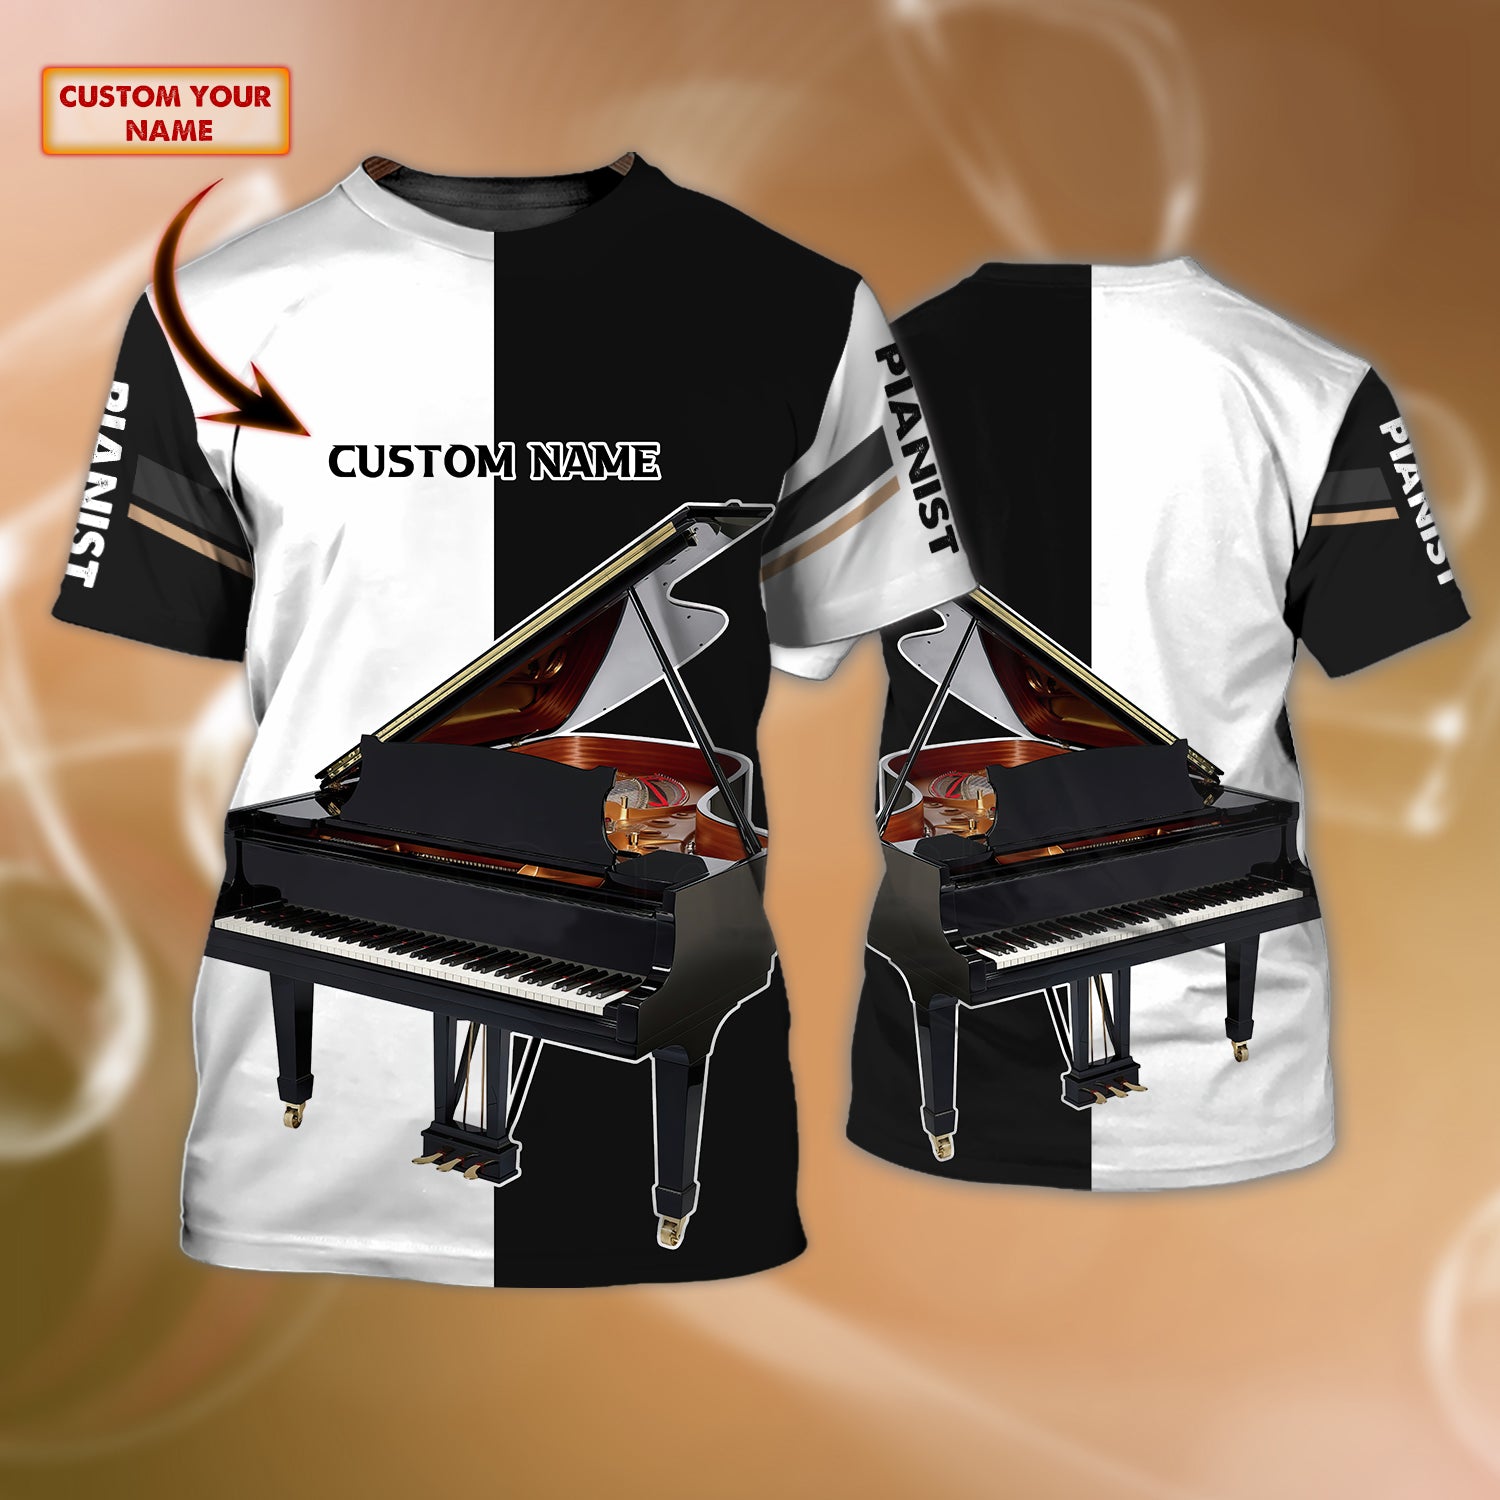 Pianist Black And White - Personalized Name 3D Tshirt - Pth98